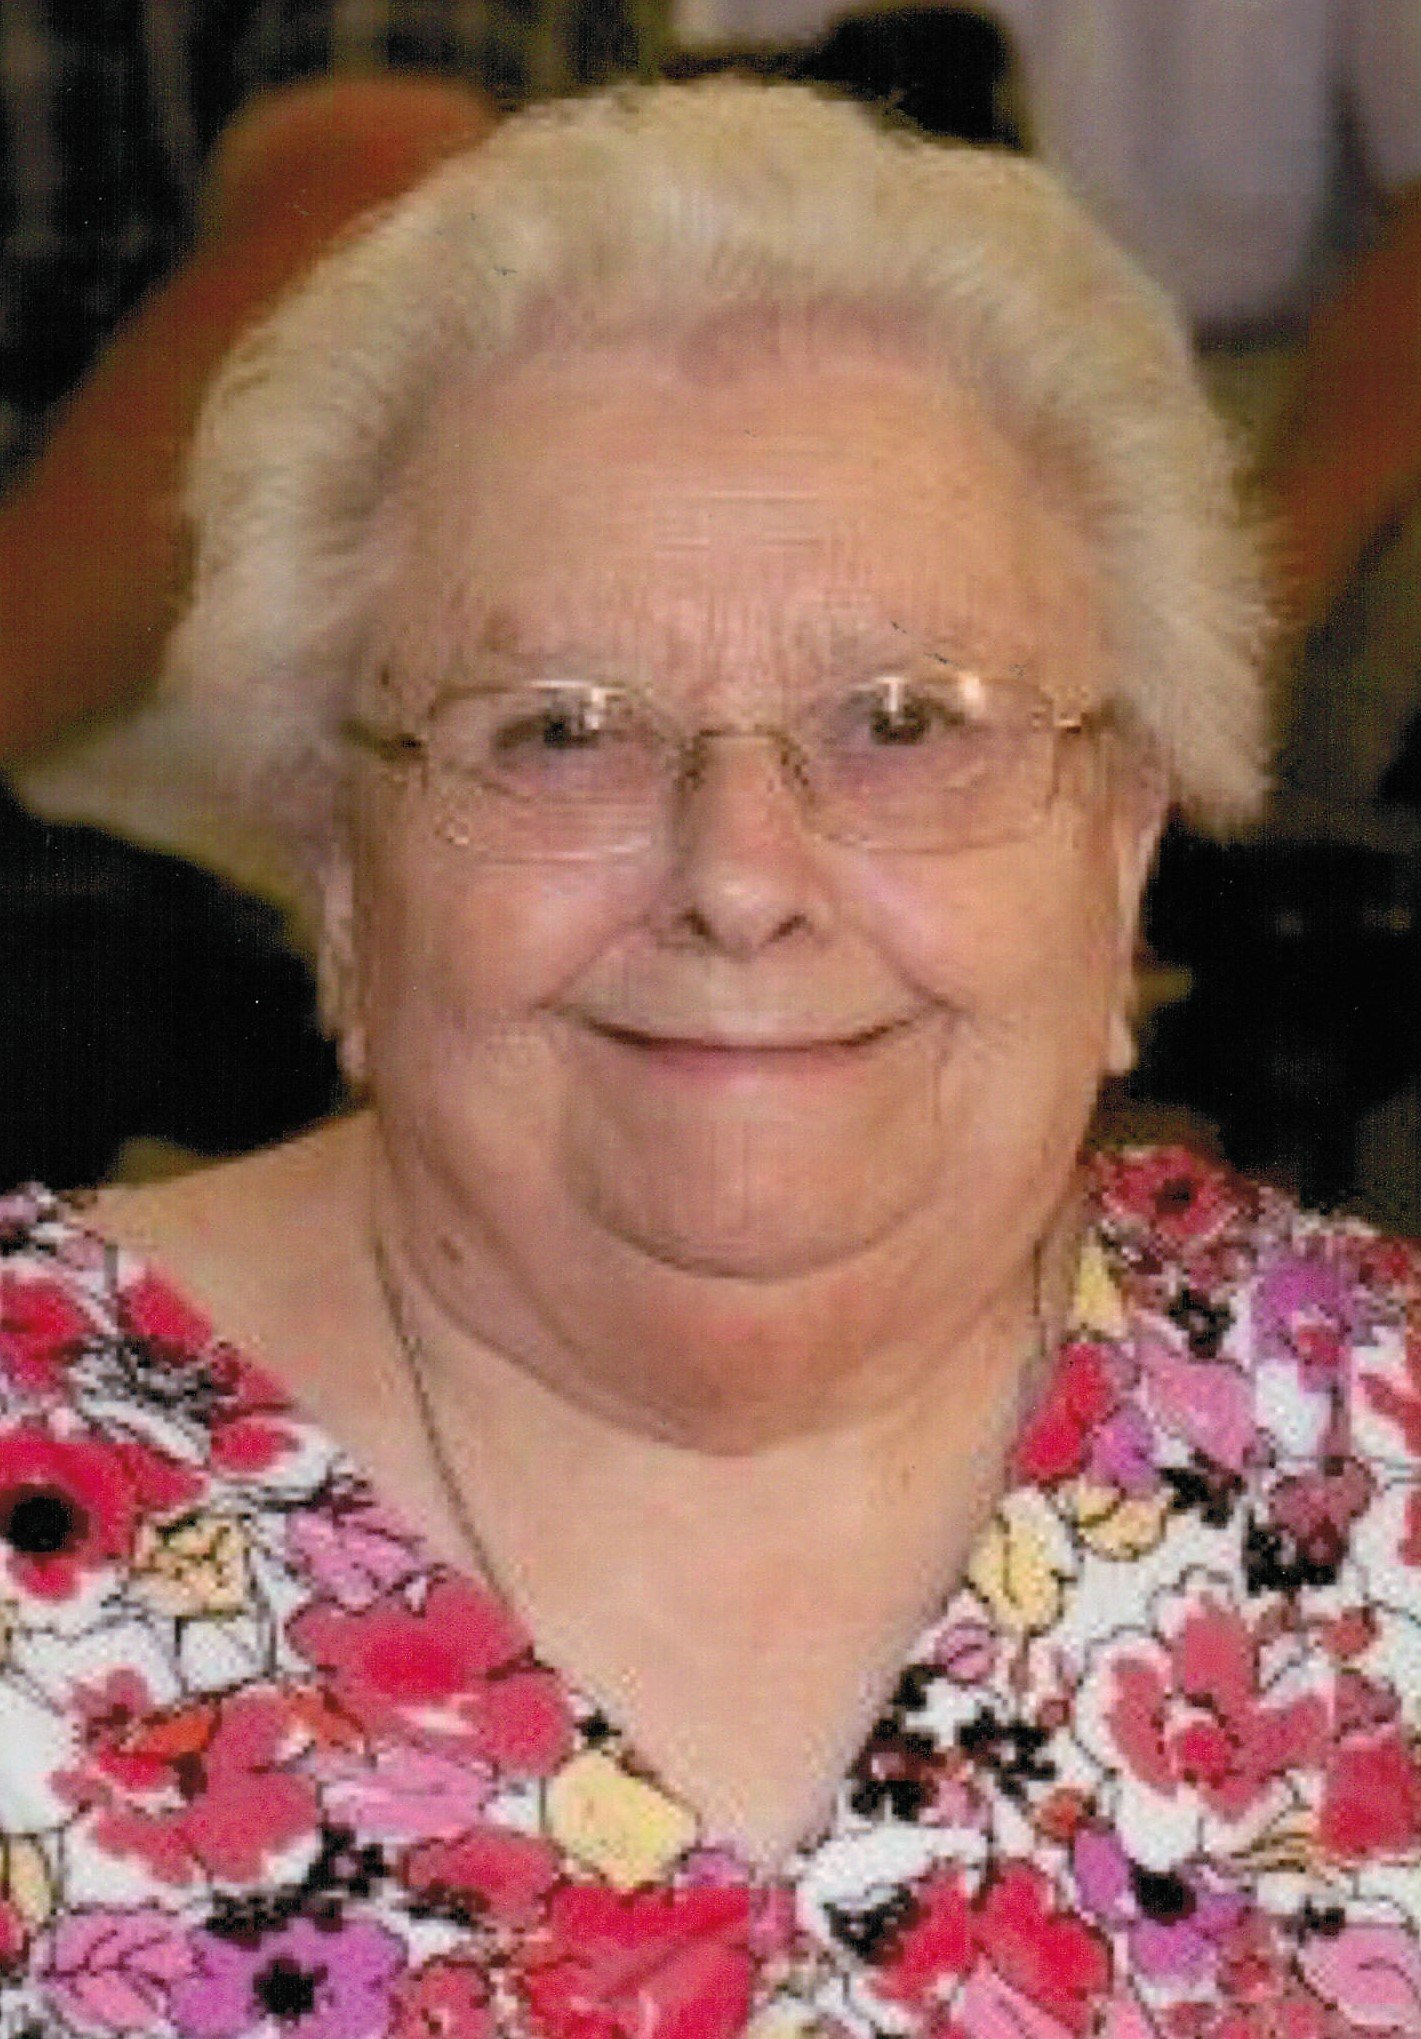 Marie Janet Shippee, 89, of Fowler